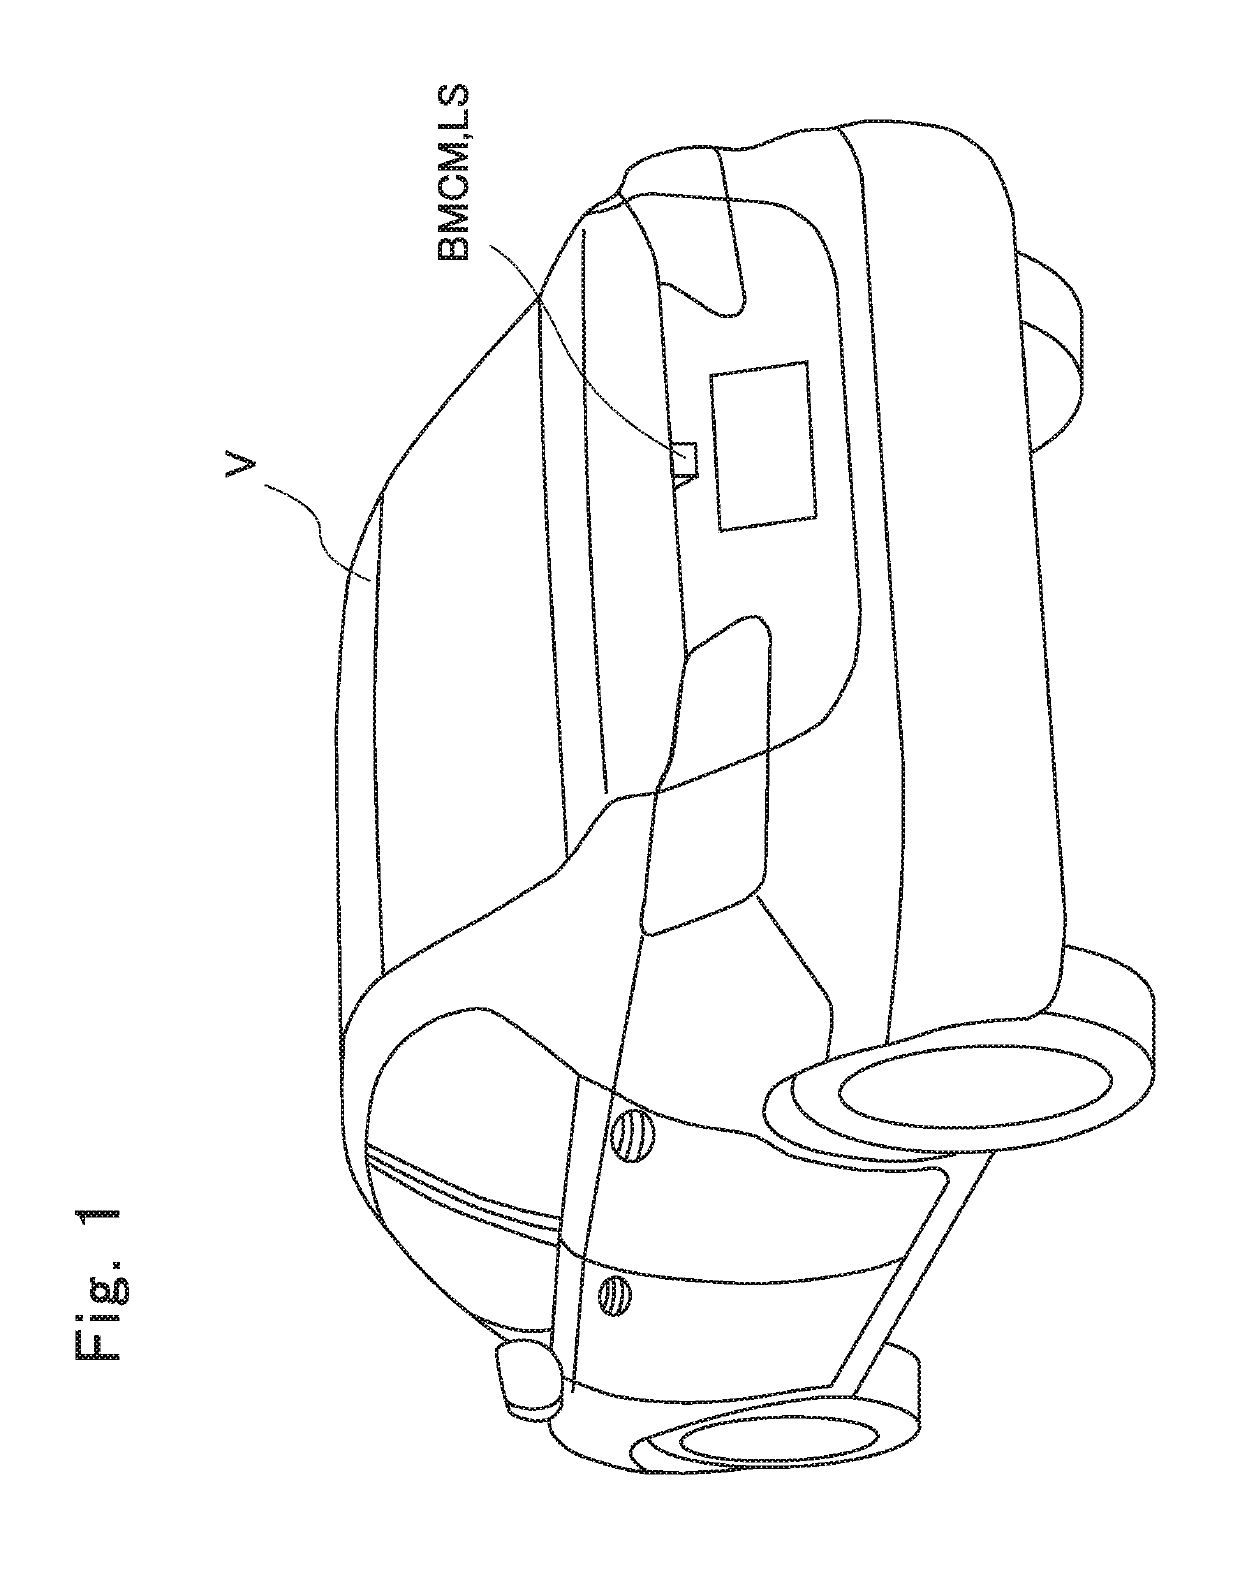 Washing device for on-board camera